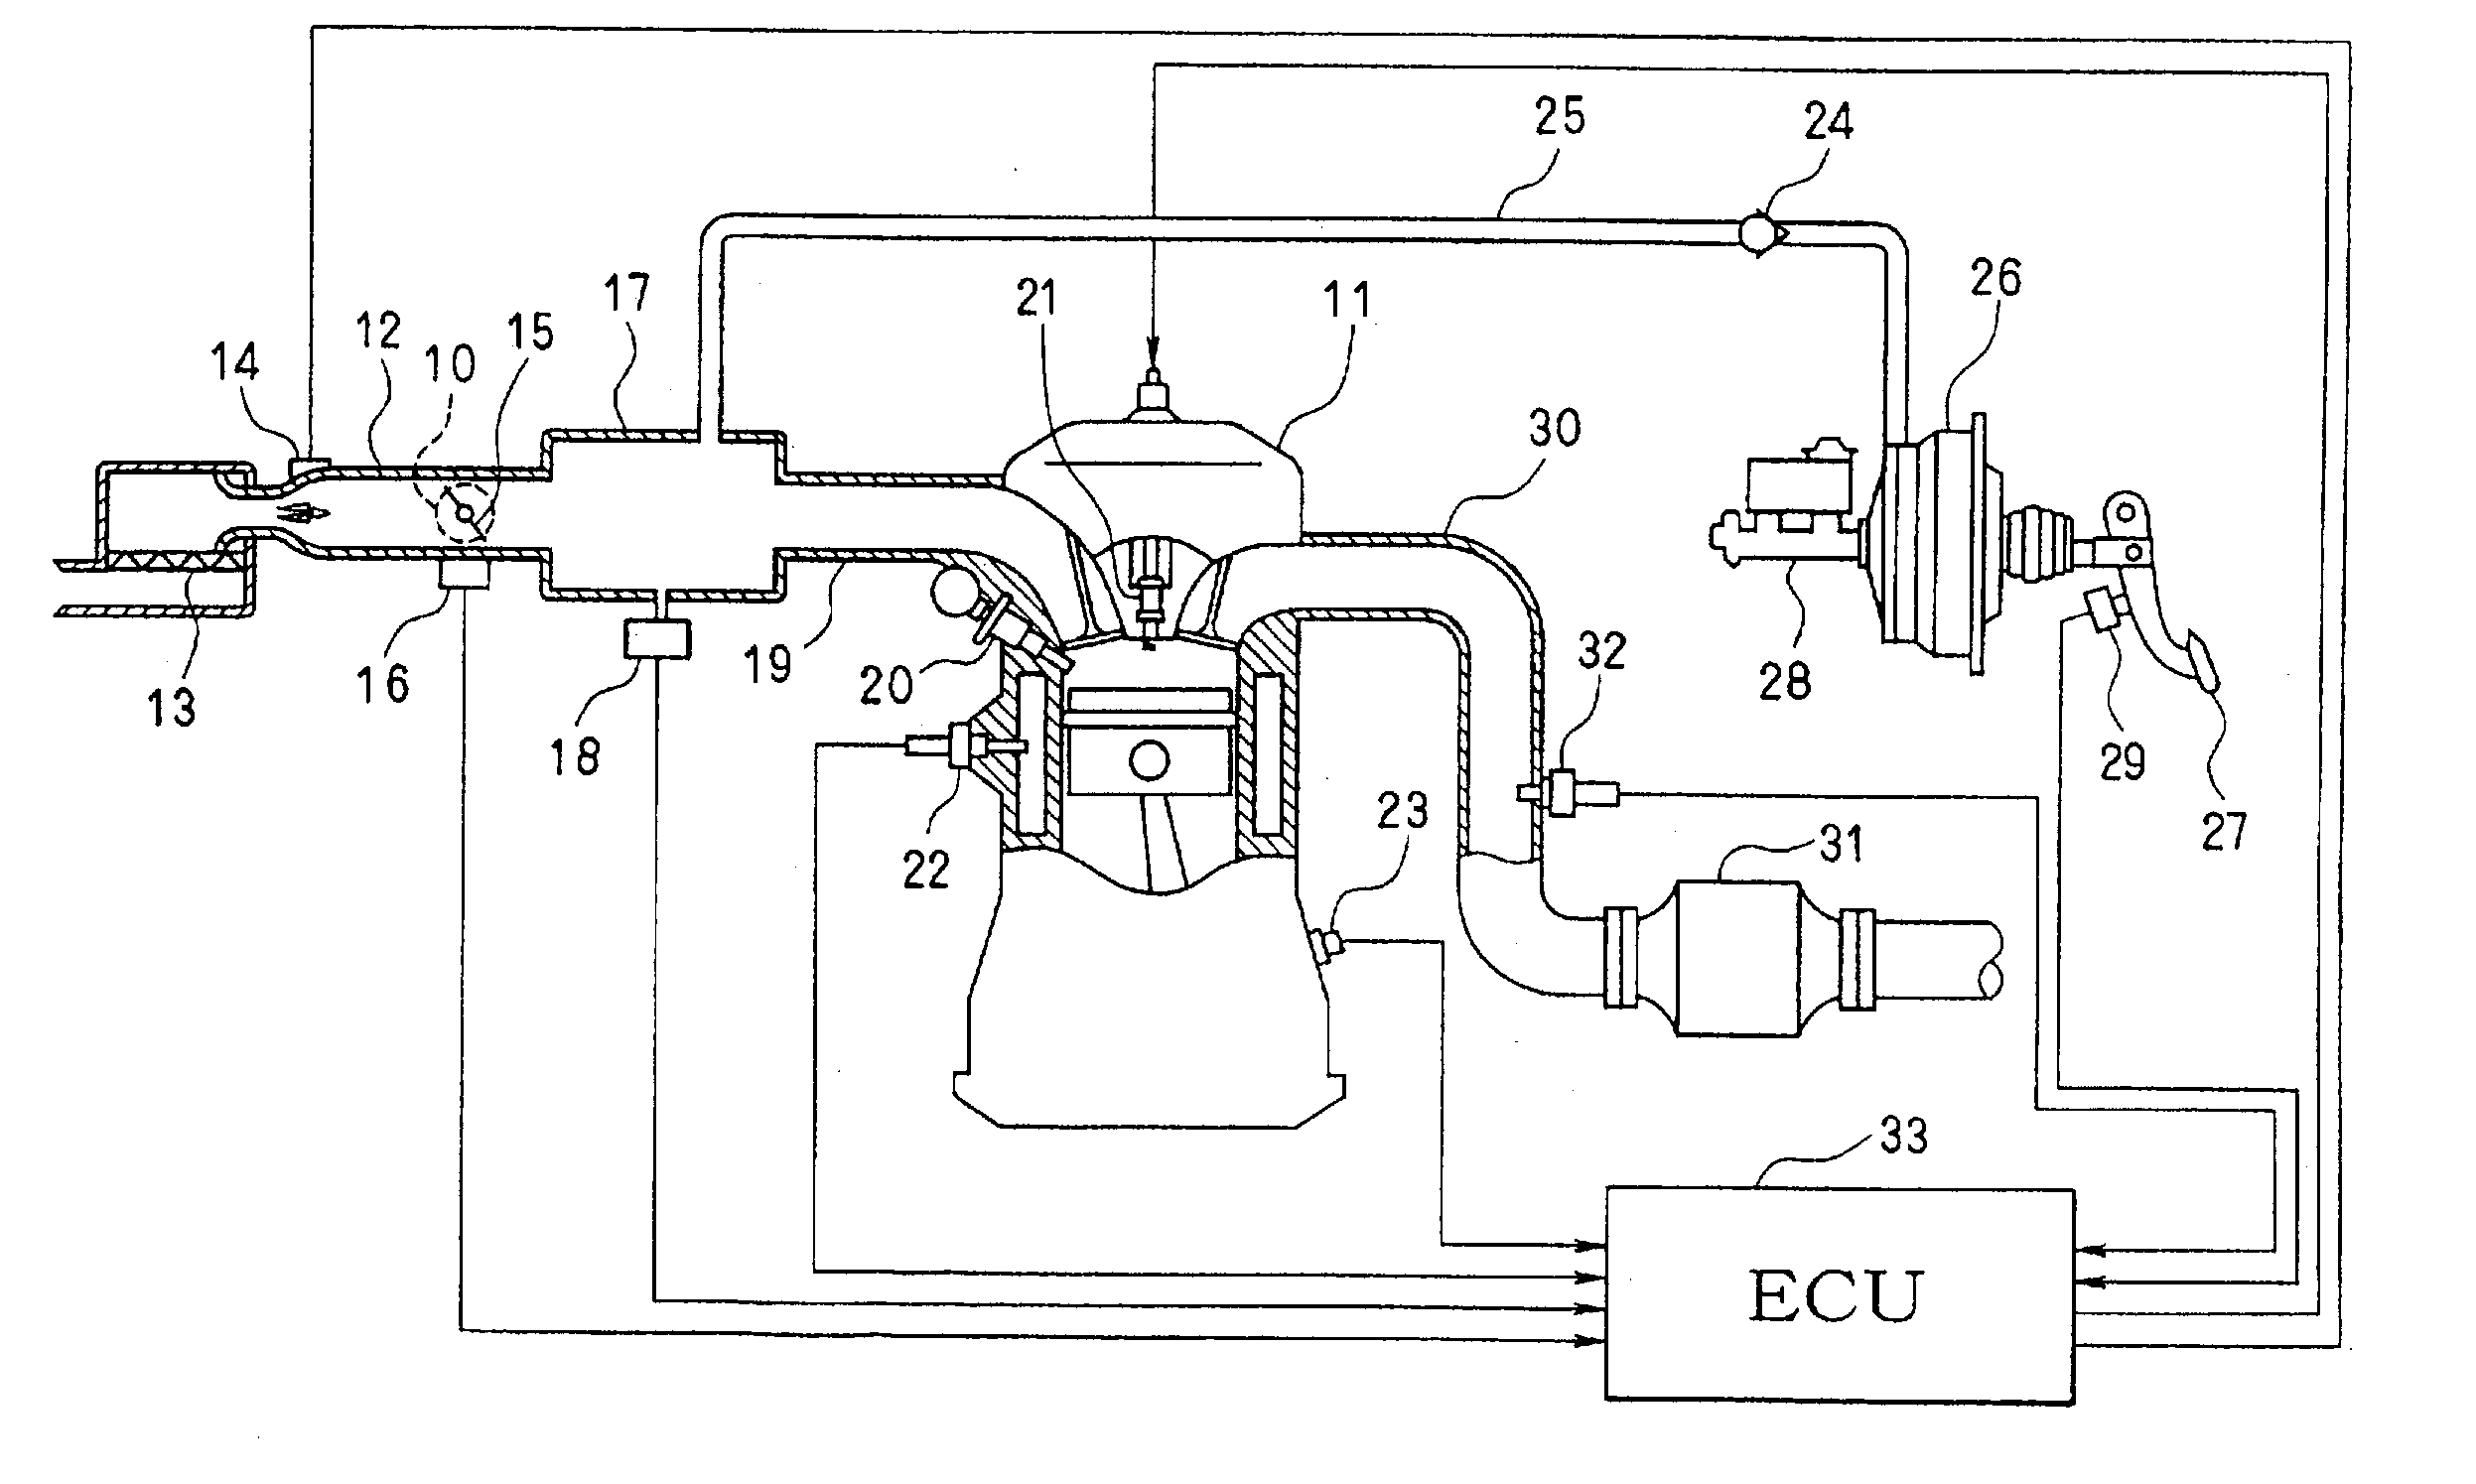 Control apparatus of internal combustion engine